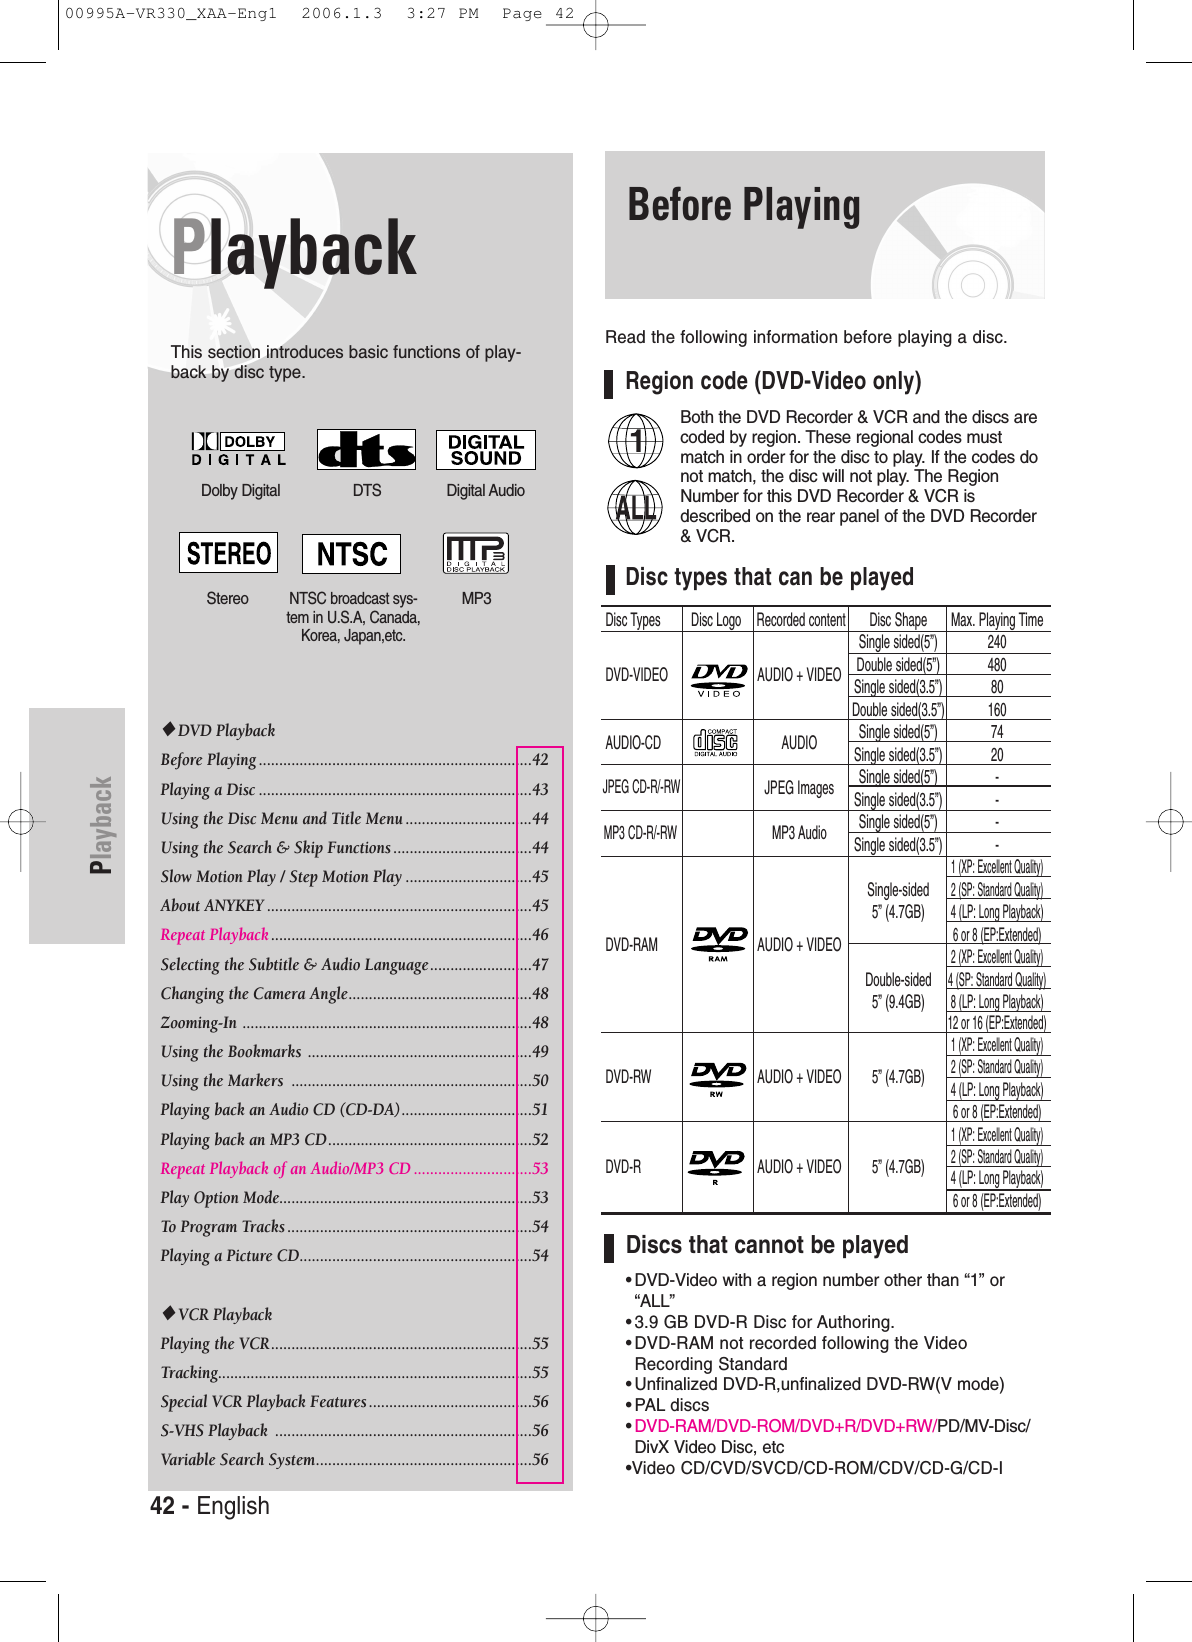 42 - EnglishPlaybackPlaybackThis section introduces basic functions of play-back by disc type.Before PlayingRead the following information before playing a disc.Region code (DVD-Video only)Both the DVD Recorder &amp; VCR and the discs arecoded by region. These regional codes mustmatch in order for the disc to play. If the codes donot match, the disc will not play. The RegionNumber for this DVD Recorder &amp; VCR isdescribed on the rear panel of the DVD Recorder&amp; VCR.Disc types that can be playedDiscs that cannot be played•DVD-Video with a region number other than “1” or“ALL”•3.9 GB DVD-R Disc for Authoring.•DVD-RAM not recorded following the VideoRecording Standard•Unfinalized DVD-R,unfinalized DVD-RW(V mode)•PAL discs•DVD-RAM/DVD-ROM/DVD+R/DVD+RW/PD/MV-Disc/DivX Video Disc, etc•Video CD/CVD/SVCD/CD-ROM/CDV/CD-G/CD-IDolby Digital DTS Digital AudioStereo MP3NTSC broadcast sys-tem in U.S.A, Canada,Korea, Japan,etc.◆DVD PlaybackBefore Playing ...................................................................42 Playing a Disc ...................................................................43Using the Disc Menu and Title Menu ...............................44Using the Search &amp; Skip Functions ..................................44Slow Motion Play / Step Motion Play ...............................45About ANYKEY .................................................................45Repeat Playback ................................................................46Selecting the Subtitle &amp; Audio Language.........................47 Changing the Camera Angle.............................................48Zooming-In .......................................................................48Using the Bookmarks  .......................................................49Using the Markers  ...........................................................50Playing back an Audio CD (CD-DA)................................51Playing back an MP3 CD..................................................52Repeat Playback of an Audio/MP3 CD .............................53Play Option Mode..............................................................53To Program Tracks ............................................................54Playing a Picture CD.........................................................54◆VCR PlaybackPlaying the VCR................................................................55Tracking.............................................................................55Special VCR Playback Features ........................................56S-VHS Playback  ...............................................................56Variable Search System.....................................................56Disc Types Disc Logo Recorded content Disc Shape Max. Playing TimeSingle sided(5”) 240DVD-VIDEO AUDIO + VIDEO Double sided(5”) 480Single sided(3.5”)80Double sided(3.5”) 160AUDIO-CD AUDIO Single sided(5”)74Single sided(3.5”)20JPEG Images Single sided(5”)-Single sided(3.5”)-MP3 Audio Single sided(5”)-Single sided(3.5”)-1 (XP: Excellent Quality)Single-sided2 (SP: Standard Quality)5” (4.7GB)4 (LP: Long Playback)DVD-RAM AUDIO + VIDEO6 or 8 (EP:Extended)2 (XP: Excellent Quality)Double-sided4 (SP: Standard Quality)5” (9.4GB)8 (LP: Long Playback)12 or 16 (EP:Extended)1 (XP: Excellent Quality)DVD-RW AUDIO + VIDEO 5” (4.7GB)2 (SP: Standard Quality)4 (LP: Long Playback)6 or 8 (EP:Extended)1 (XP: Excellent Quality)DVD-R AUDIO + VIDEO 5” (4.7GB)2 (SP: Standard Quality)4 (LP: Long Playback)6 or 8 (EP:Extended)JPEG CD-R/-RWMP3 CD-R/-RW00995A-VR330_XAA-Eng1  2006.1.3  3:27 PM  Page 42